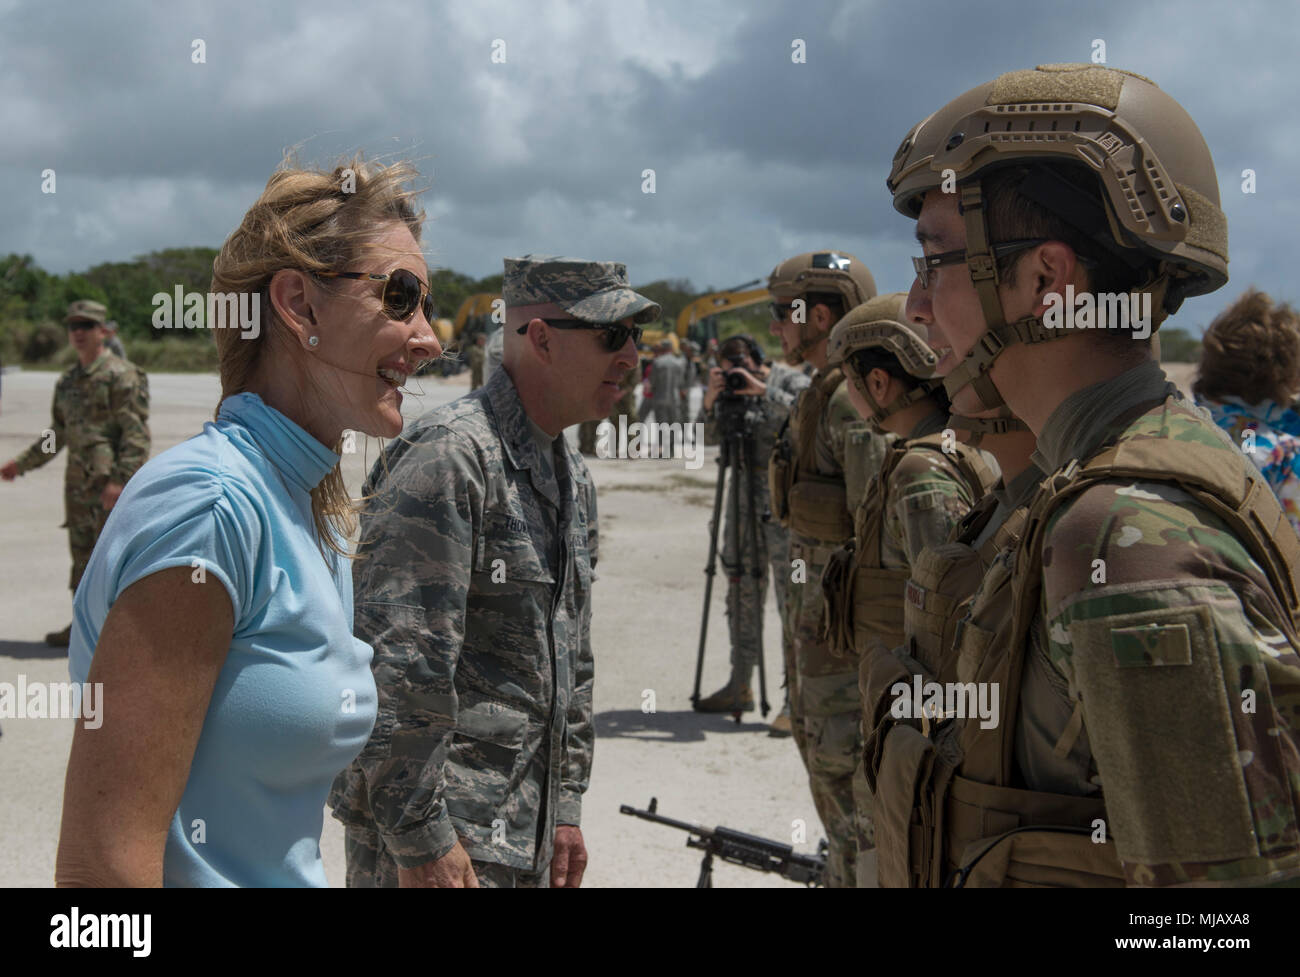 Ms. Karrin Taylor, Air Force civic leader, left, and Brig. Gen. Edward Thomas, director of Public Affairs, office of the secretary of the Air Force, speak to Airmen assigned to the 736th Security Forces Squadron during a civic leader tour visit to Andersen Air Force Base, Guam, April 28, 2018. The tour allowed the civic leaders to view a new perspective of the military missions on island by getting a behind-the- scenes look into workcenters and flightline operations. (U.S. Air Force photo by Staff Sgt. Alexander W. Riedel) Stock Photo